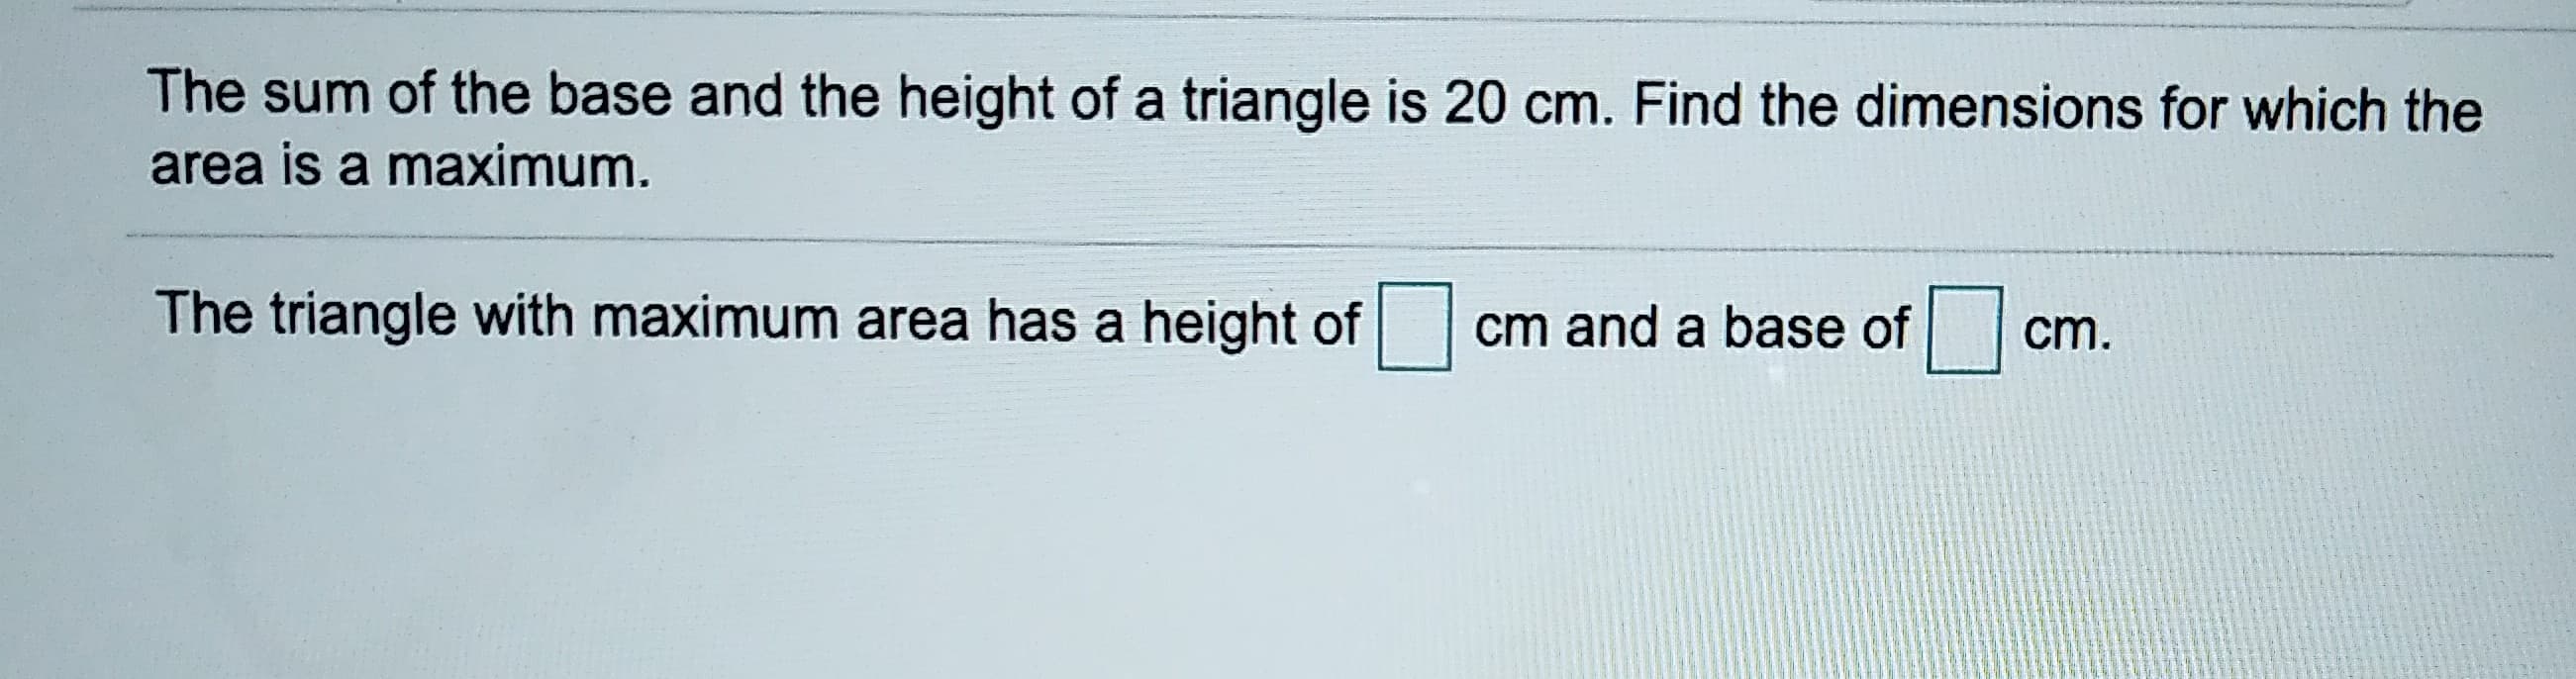 The sum of the base and the height of a triangle is 20 cm. Find the dimensions for which the
area is a maximum.
The triangle with maximum area has a height of
cm and a base of
cm.
